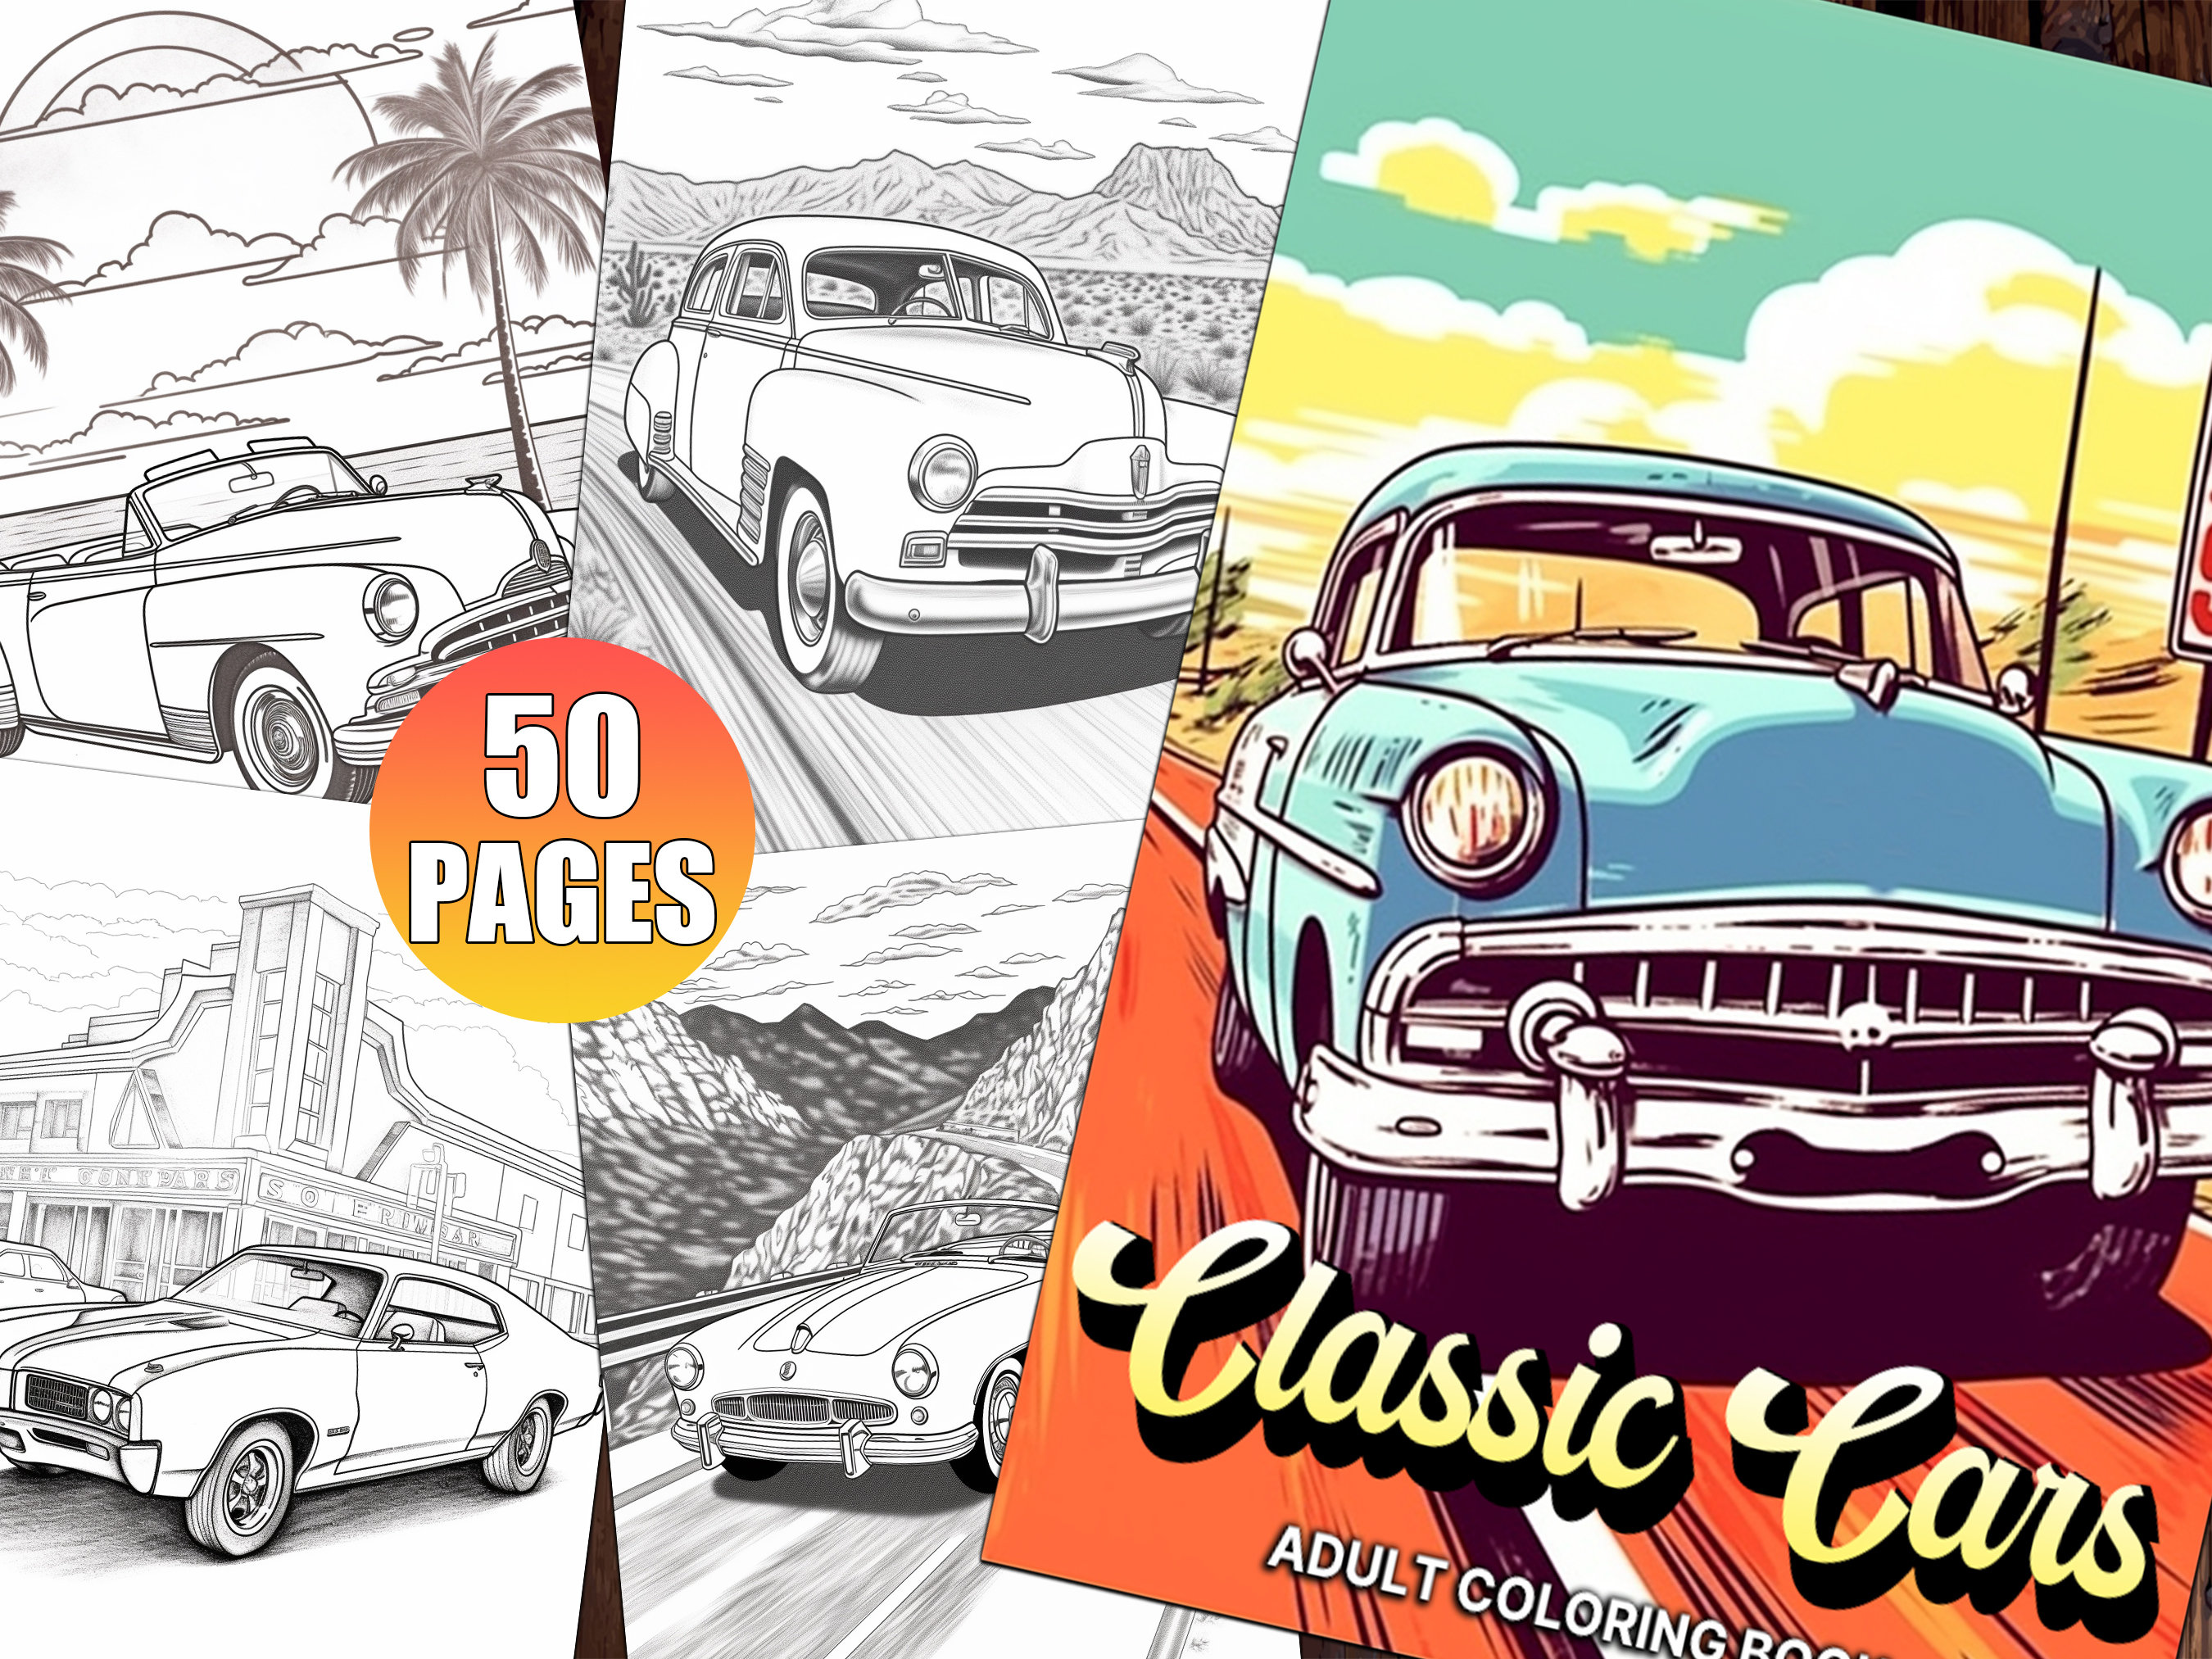 Classic cars coloring pages for adults a coloring book for vintage car lovers printable pdf digital download